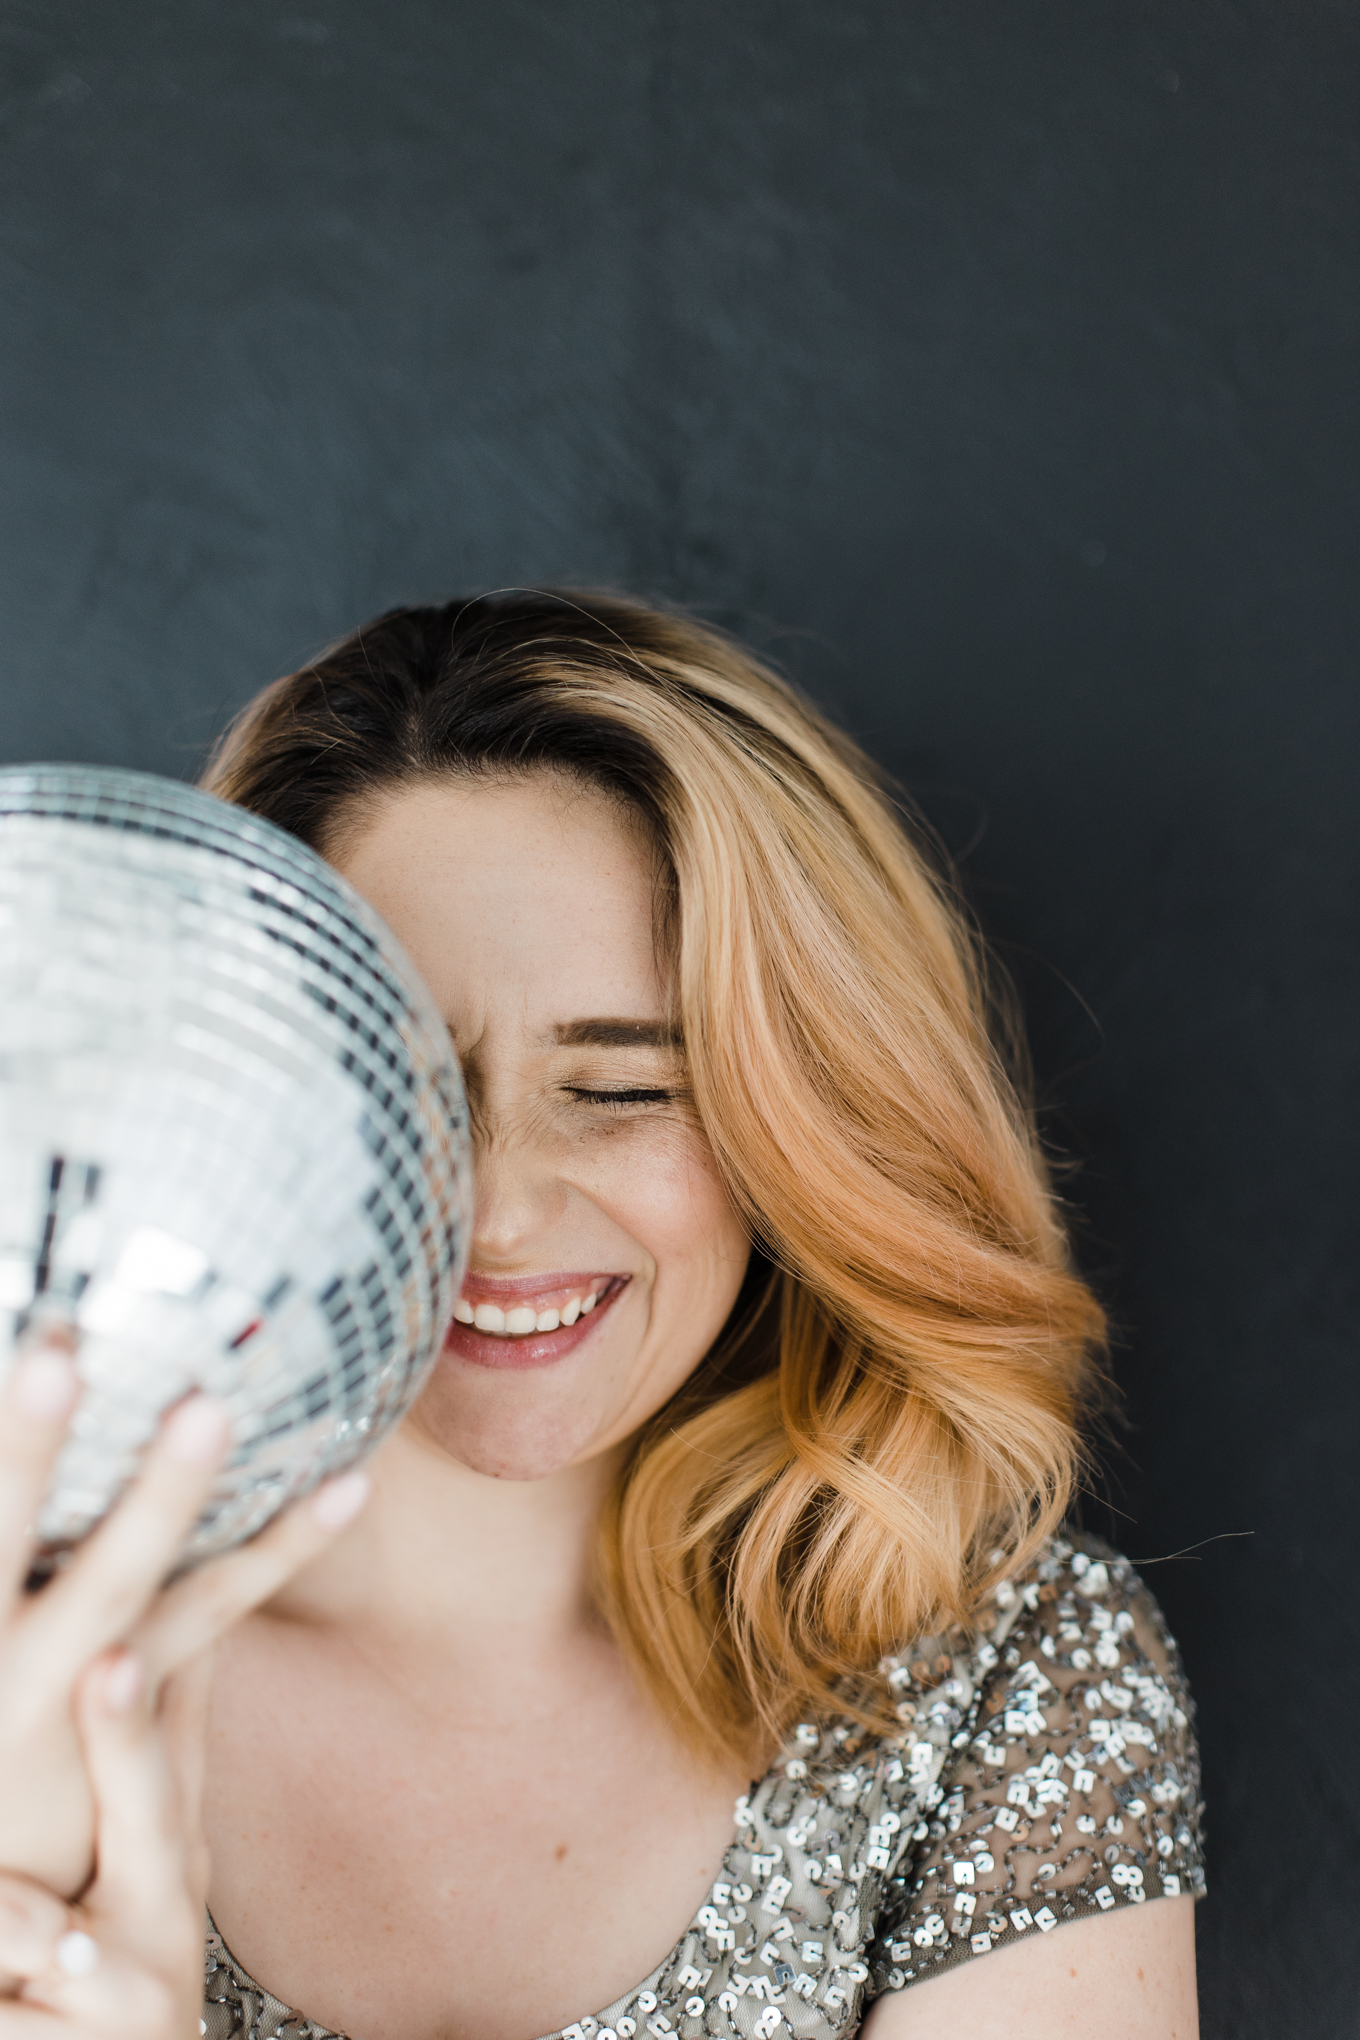 Fun Brand Photographer; photo of a woman in a sparkly, sequin, silver top smiling with closed eyes and hiding the right side of her face behind a mirrored disco ball in front of a dark background